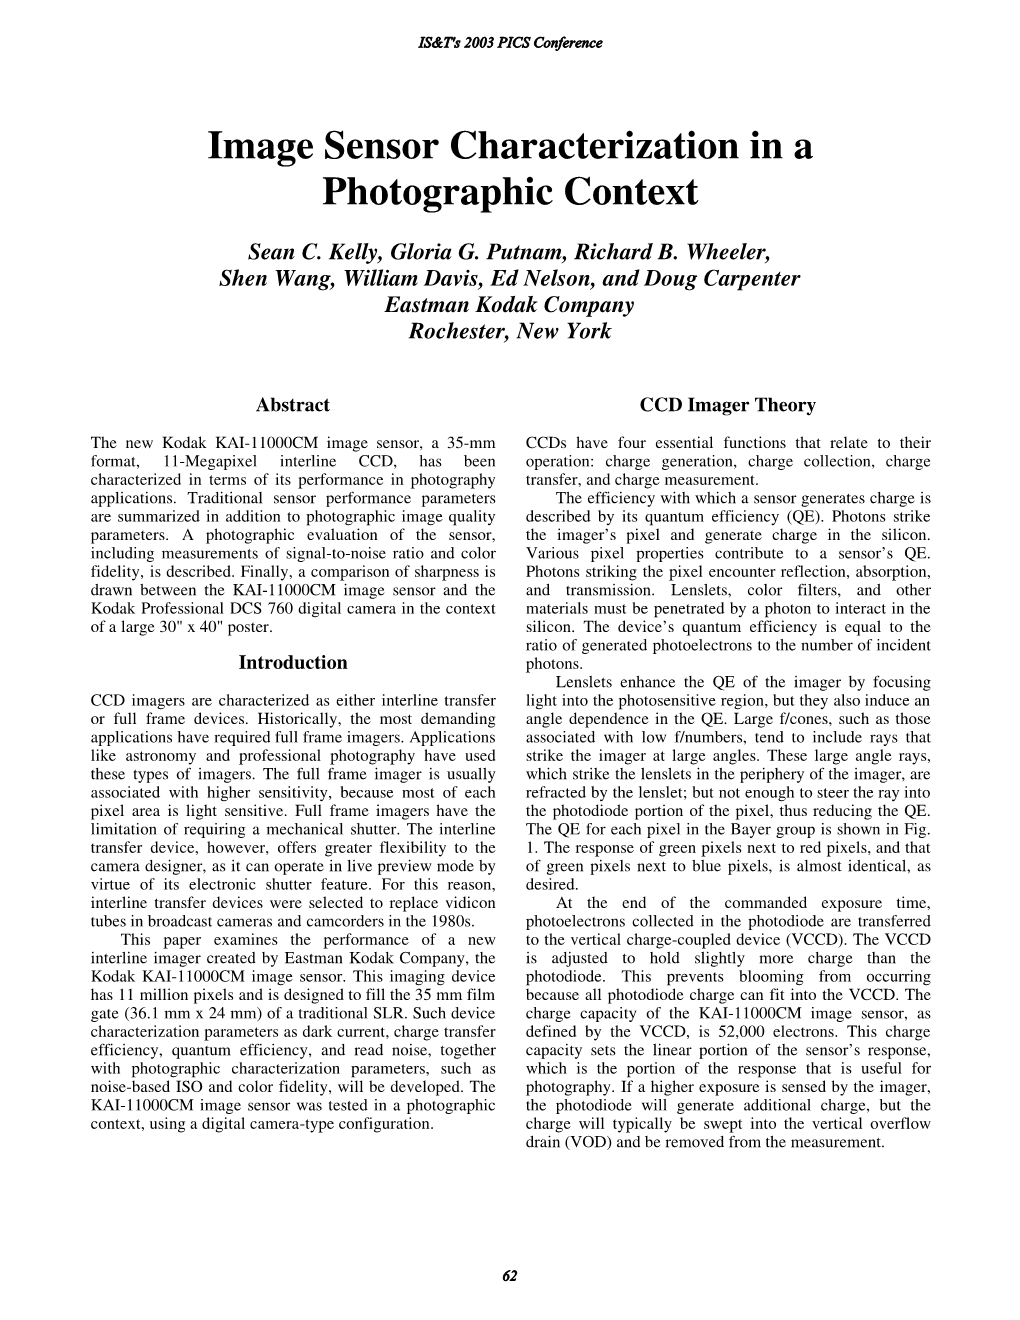 Image Sensor Characterization in a Photographic Context